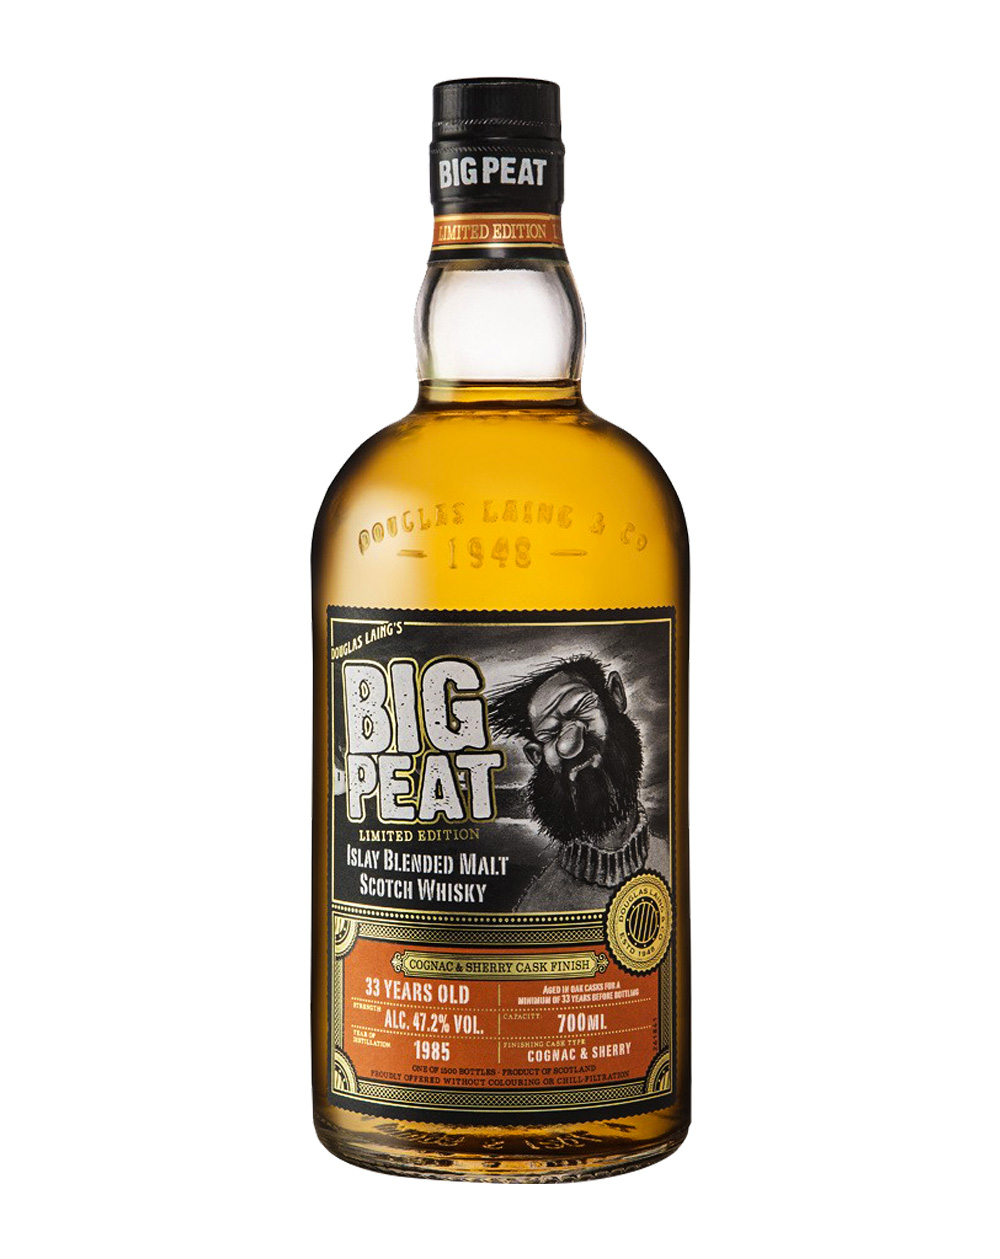 Big Peat 1985 Limited Edition - Douglas Laing (33 Years Old)